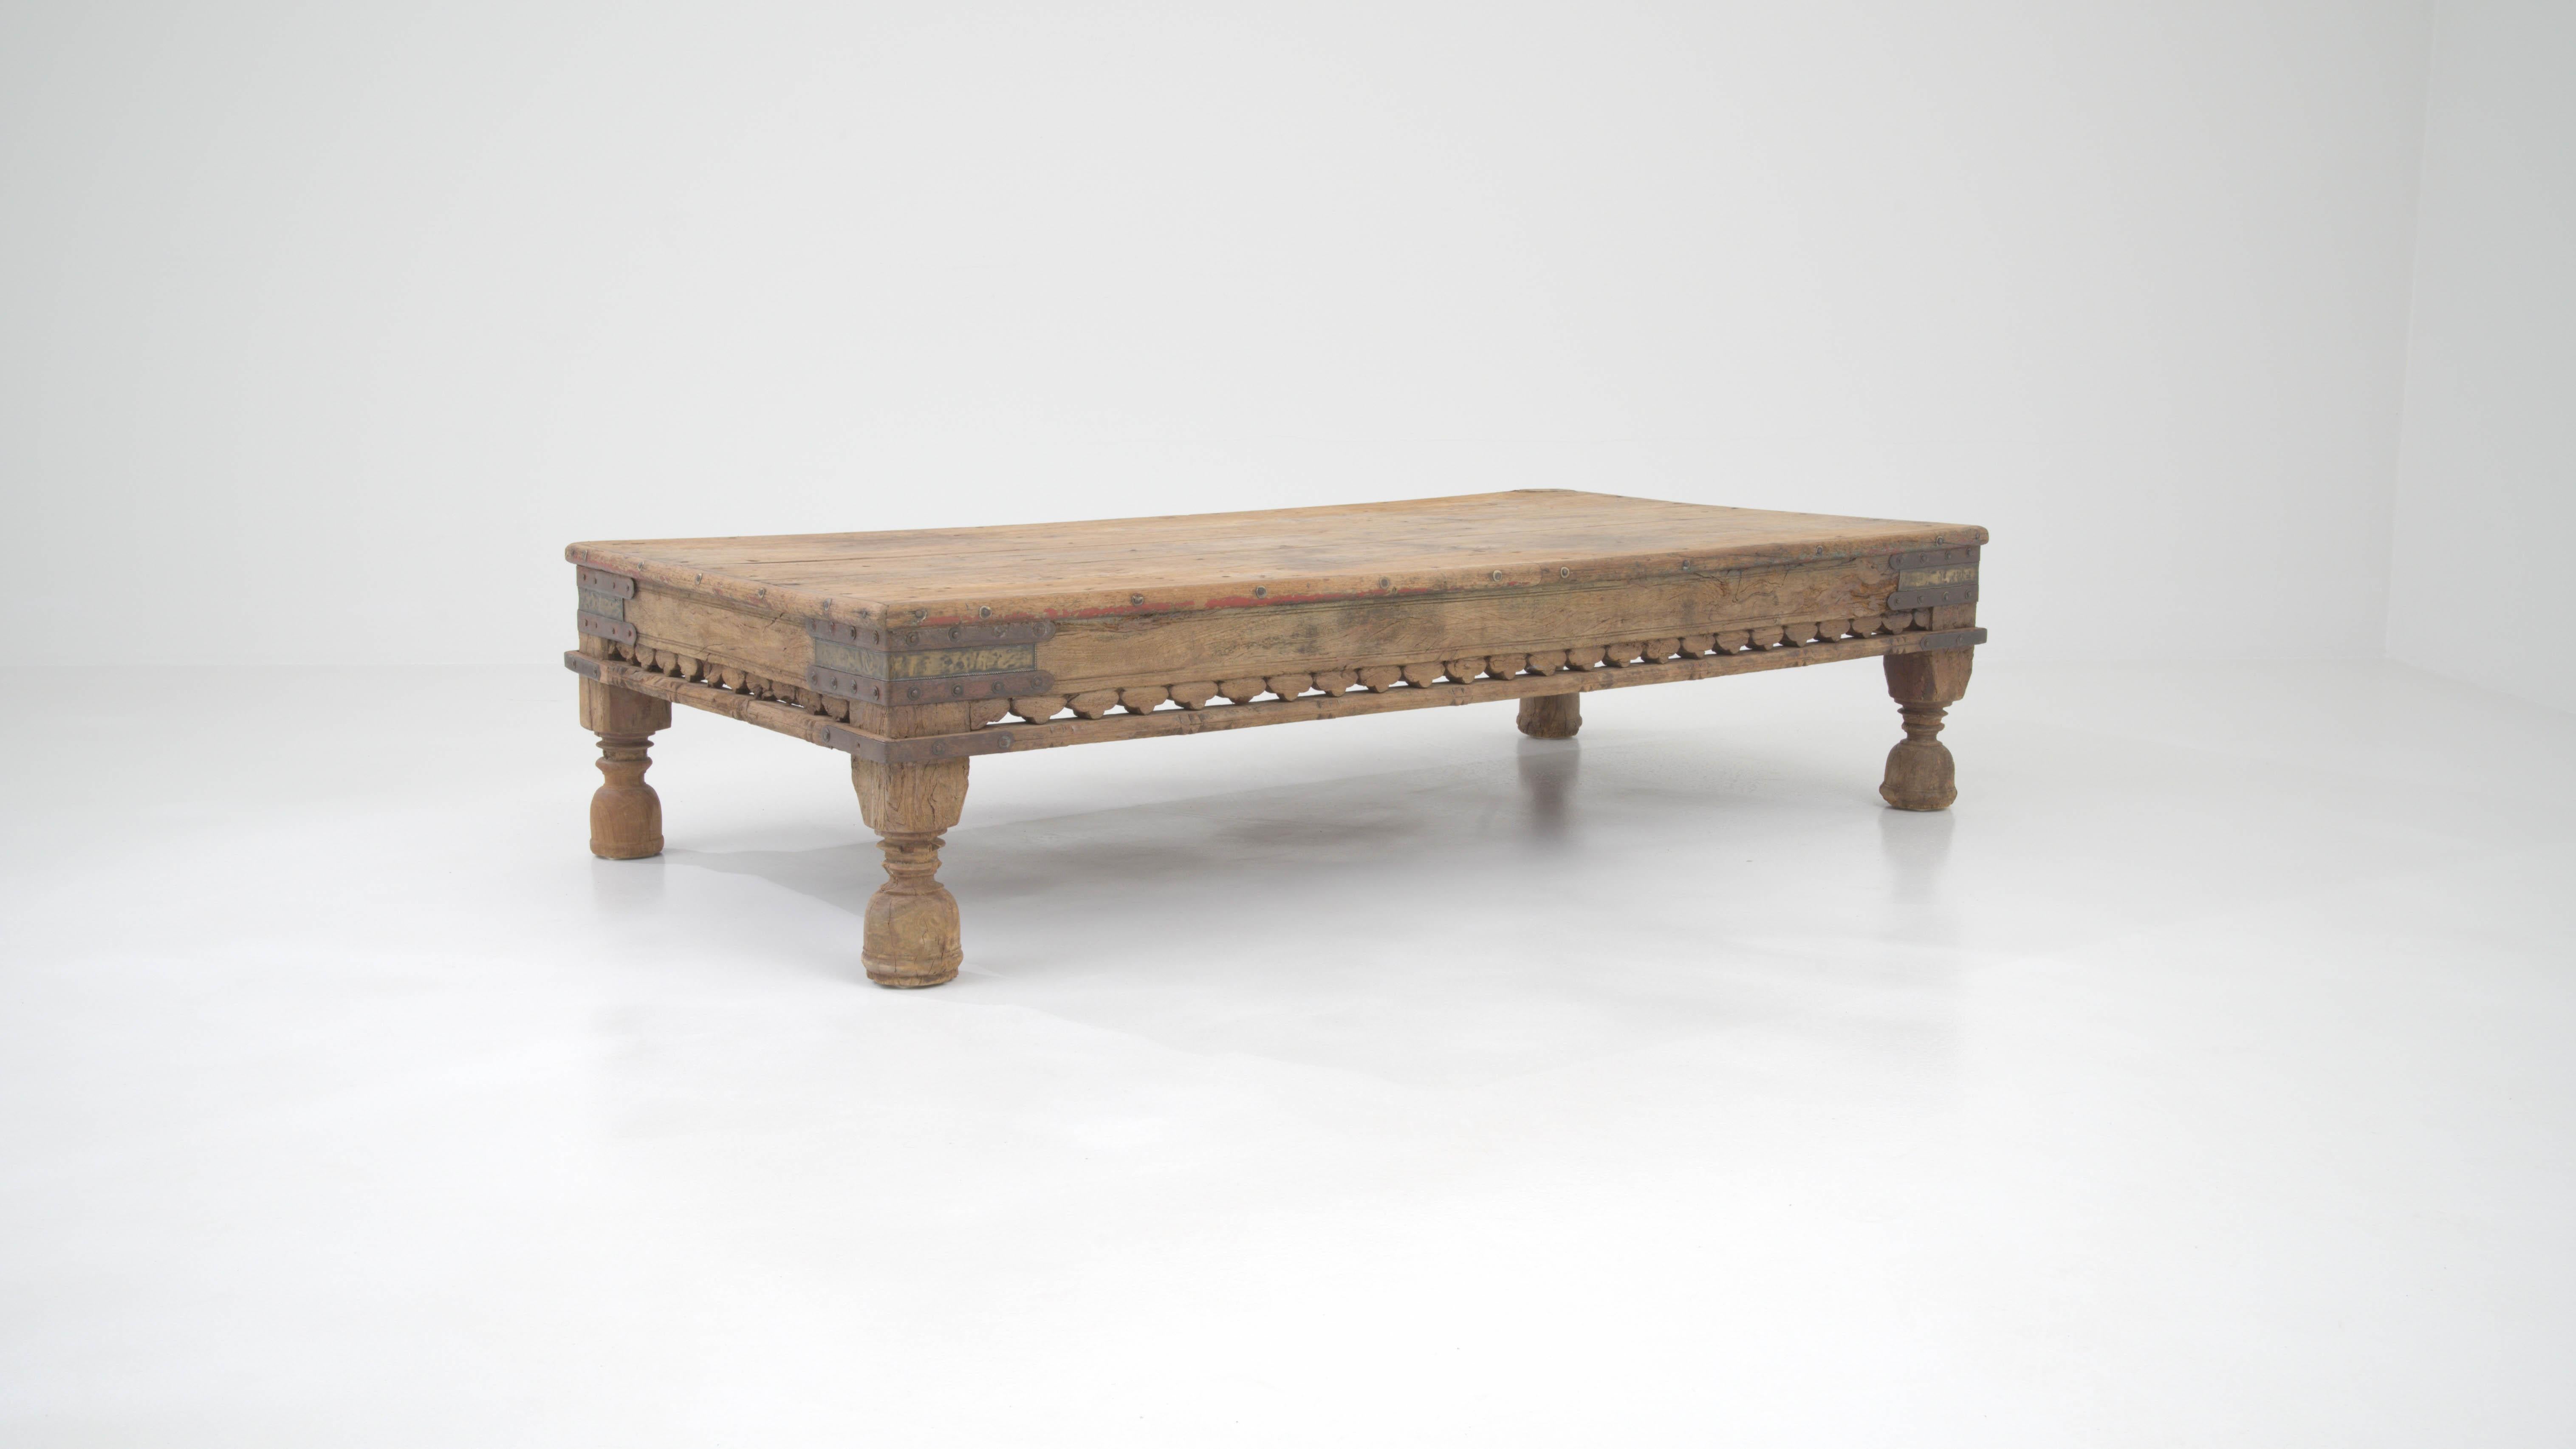 Introducing a piece of history into your living space with this early 20th-century Asian wooden coffee table. Crafted with a touch of antiquity, this sturdy, low-profile table is a testament to timeless artisanship. The robust legs, exquisitely